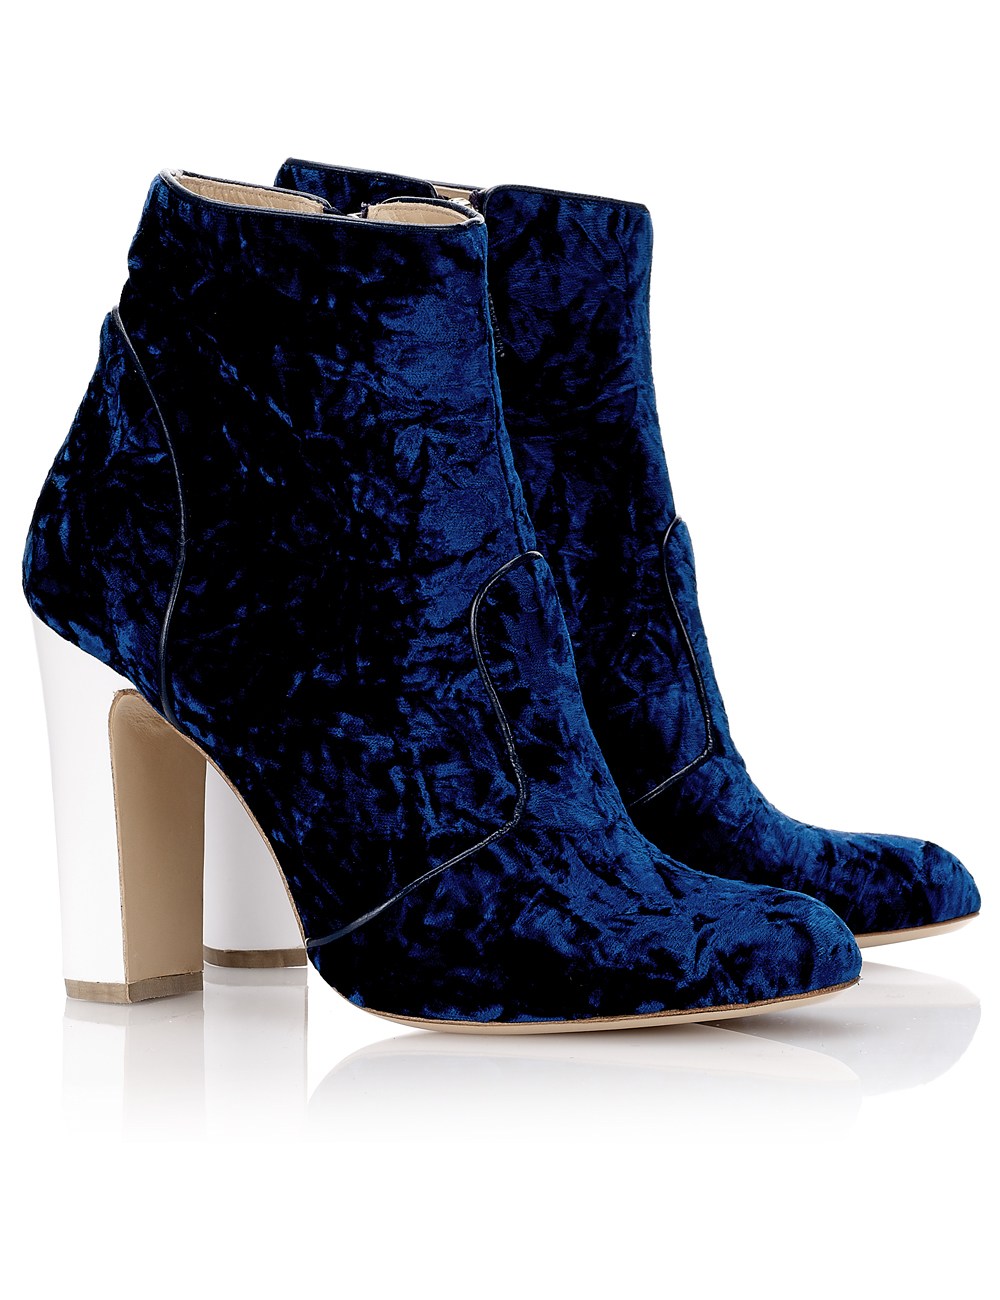 Velvet Boots3 Top 10 Most Stylish Boot Trends - 15